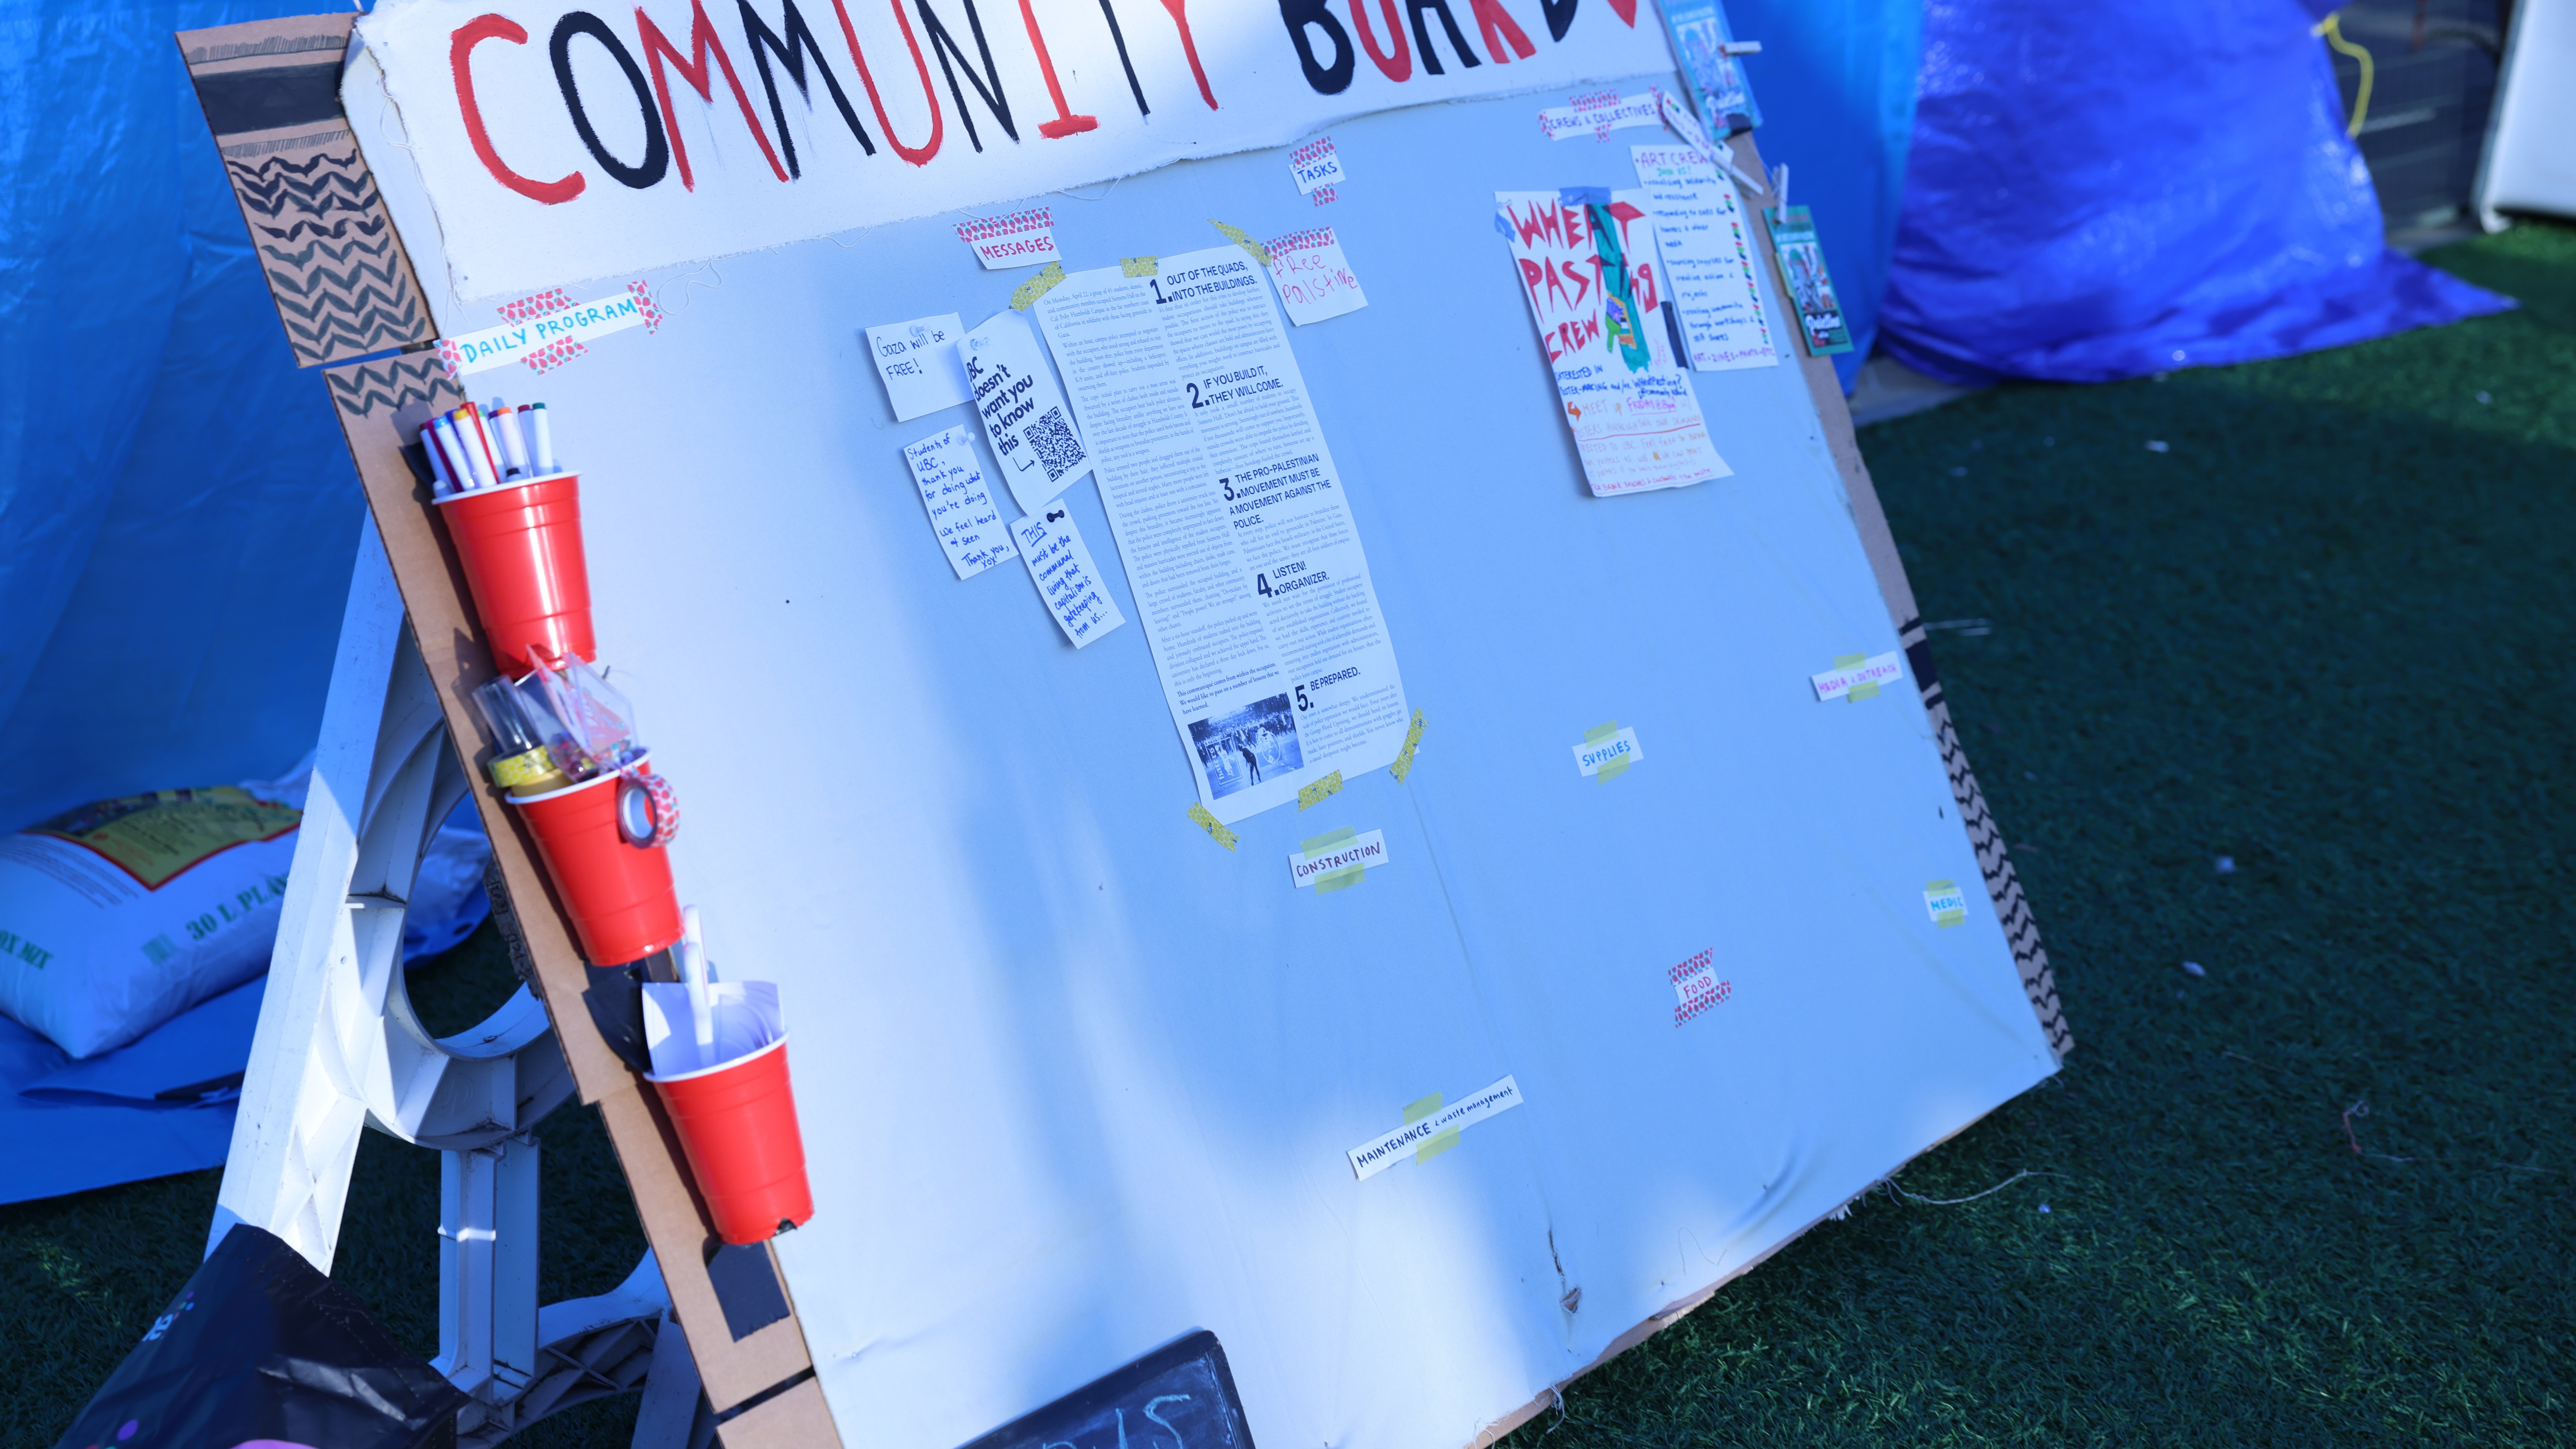 A community board in the encampment, lit up by the sunrise.